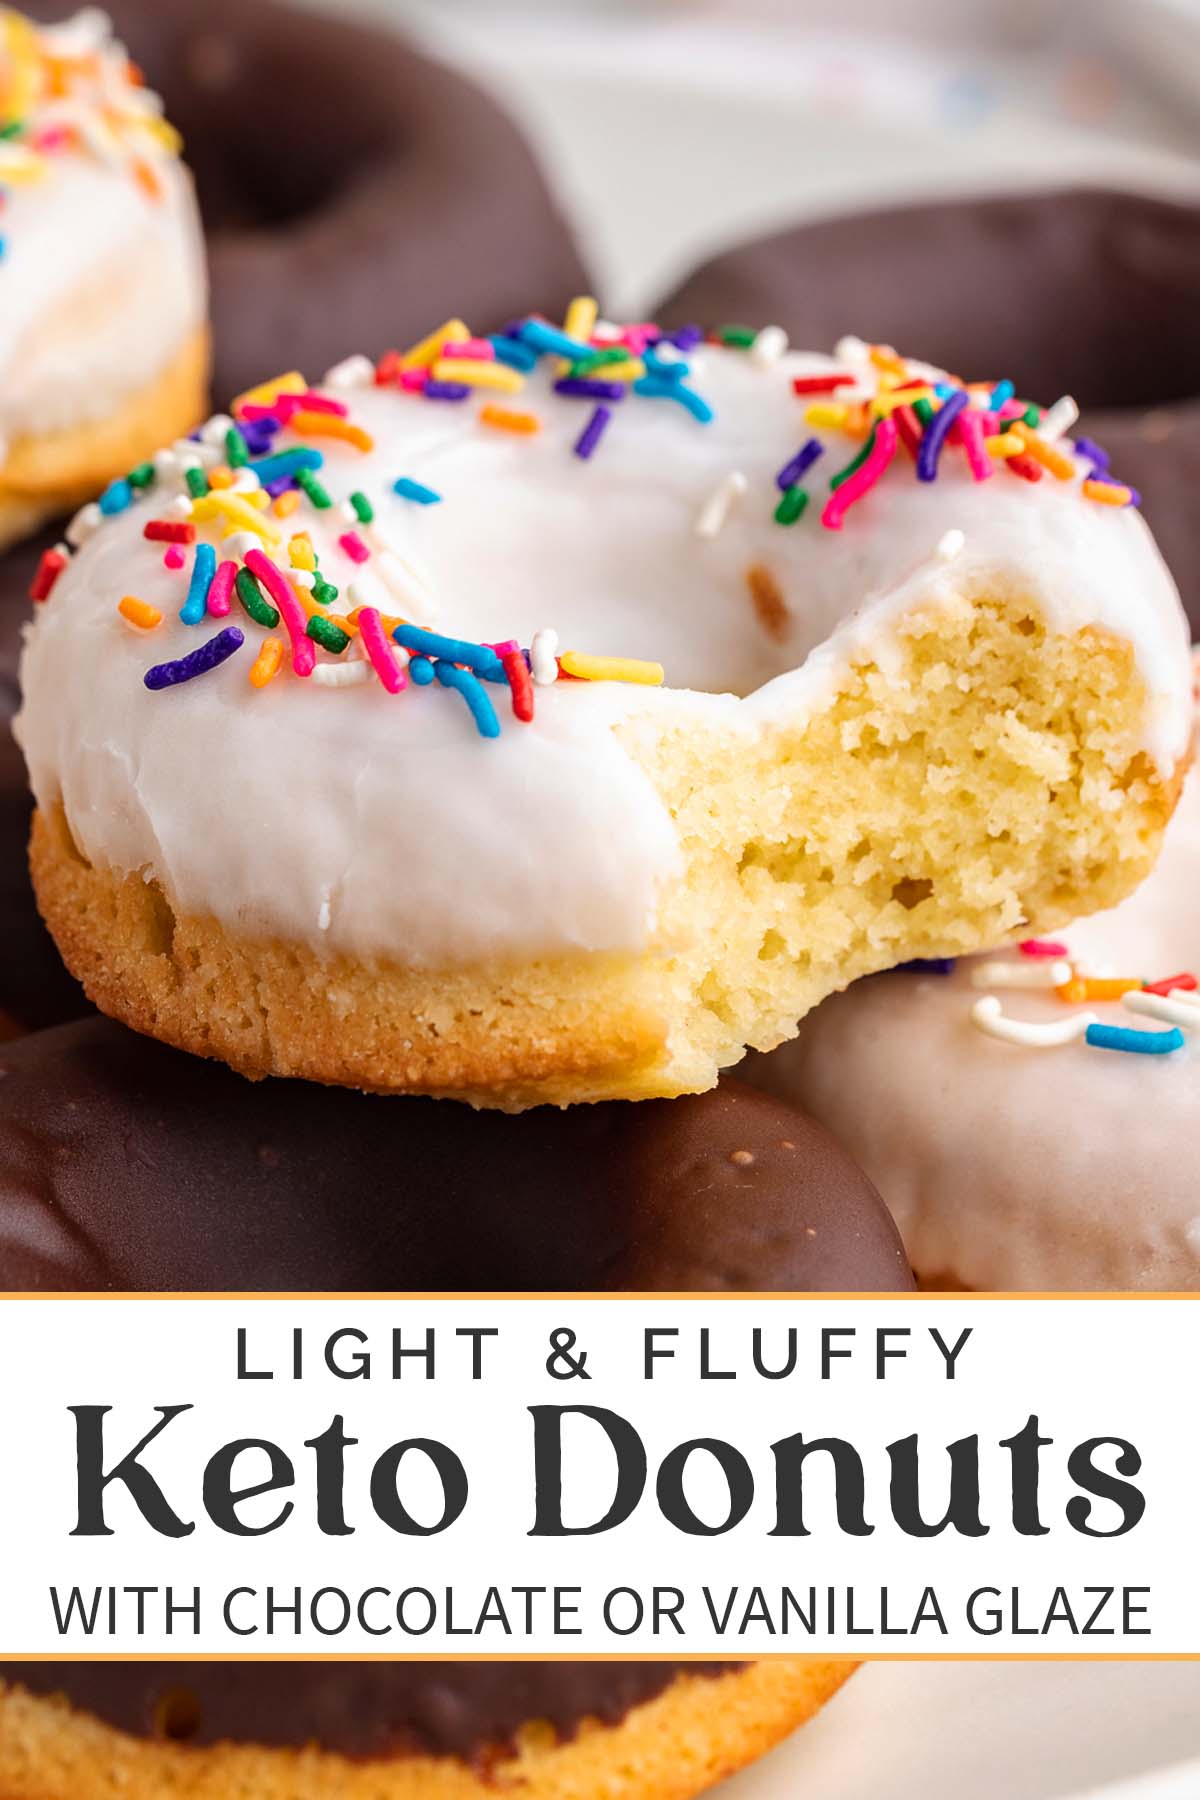 Pin graphic for keto donuts.